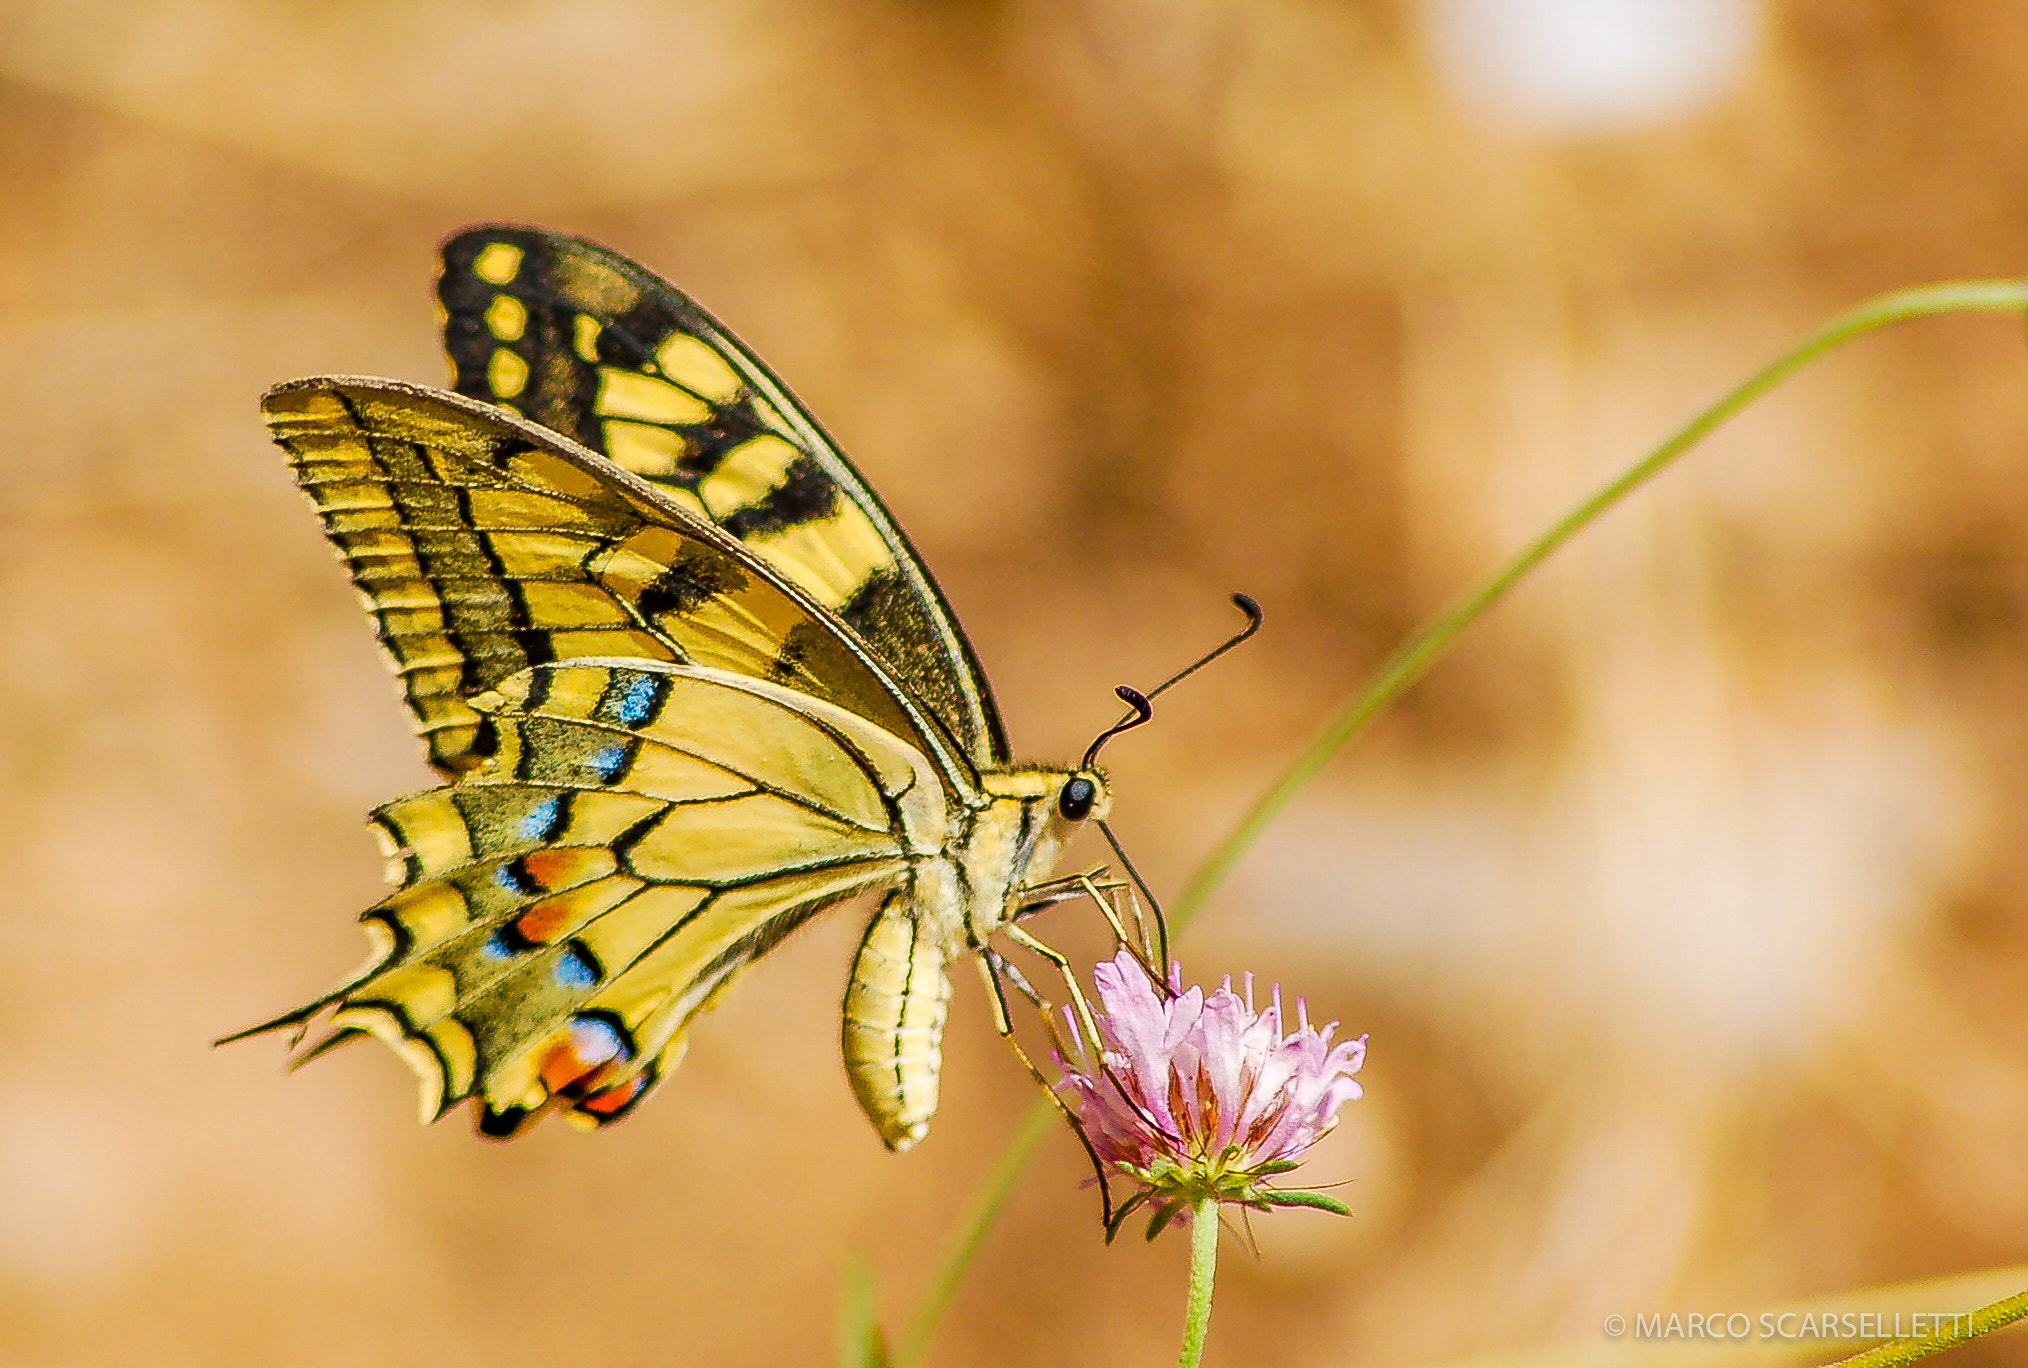 Nikon D50 + Tamron SP 70-300mm F4-5.6 Di VC USD sample photo. A common butterfly photography